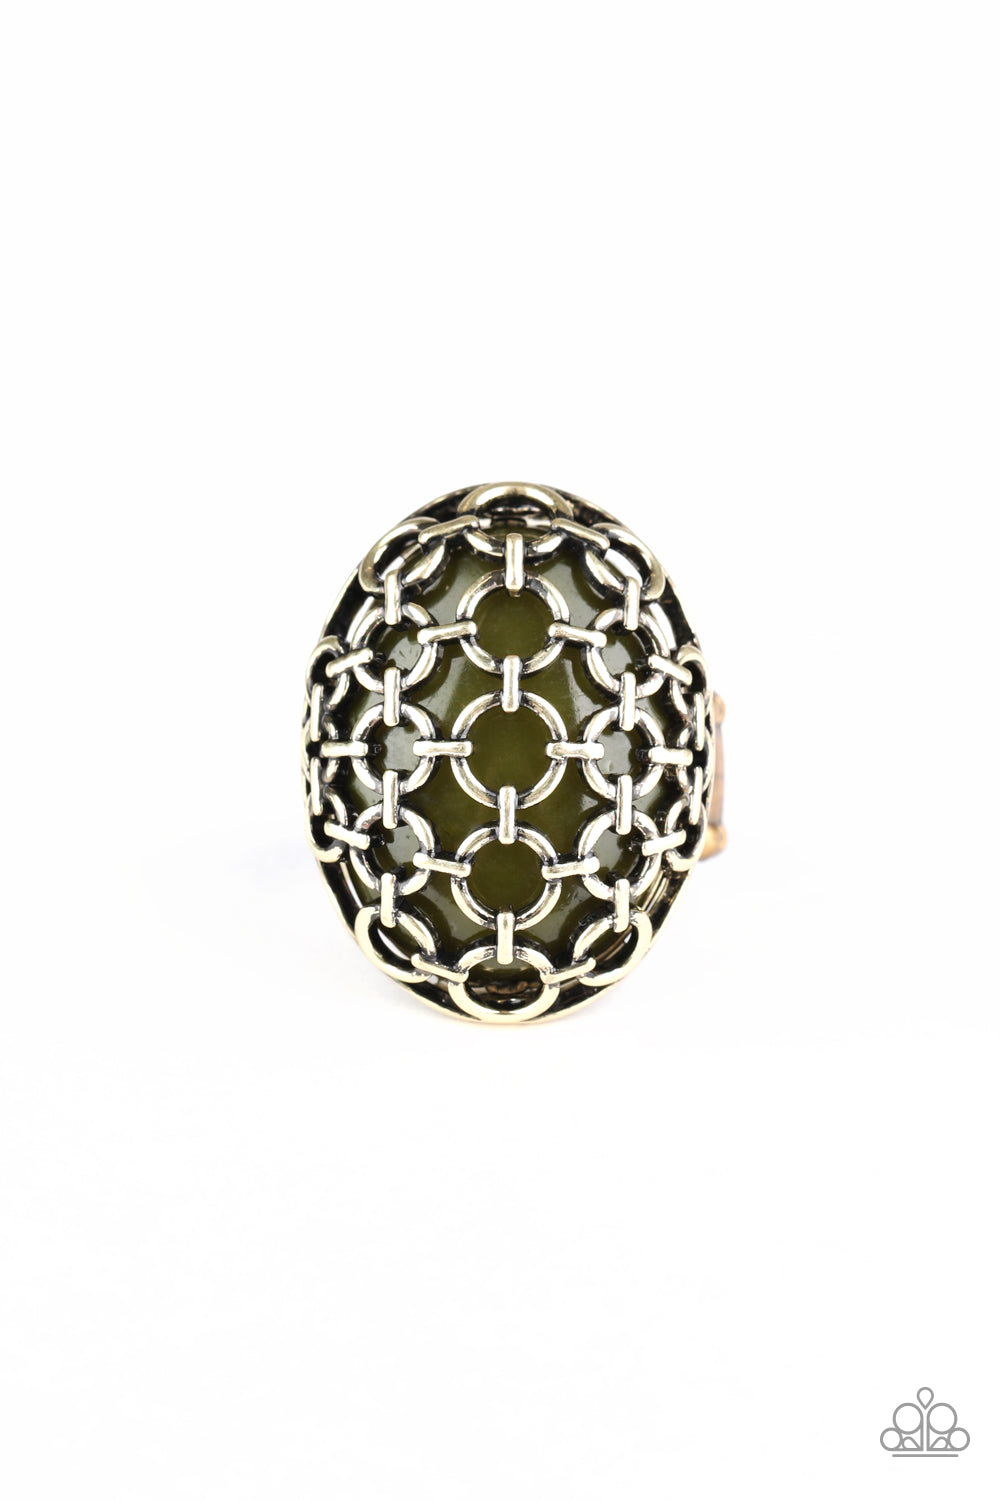 &lt;P&gt; Antiqued brass links connect into a wire-like mesh across the front of an oval green cat\&#039;s eye stone, creating a bold statement piece atop the finger. Features a stretchy band for a flexible fit.&lt;/P&gt;  

&lt;P&gt; &lt;I&gt;  Sold as one individual ring.
&lt;/I&gt;&lt;/P&gt;

&lt;img src=\&quot;https://d9b54x484lq62.cloudfront.net/paparazzi/shopping/images/517_tag150x115_1.png\&quot; alt=\&quot;New Kit\&quot; align=\&quot;middle\&quot; height=\&quot;50\&quot; width=\&quot;50\&quot;/&gt;